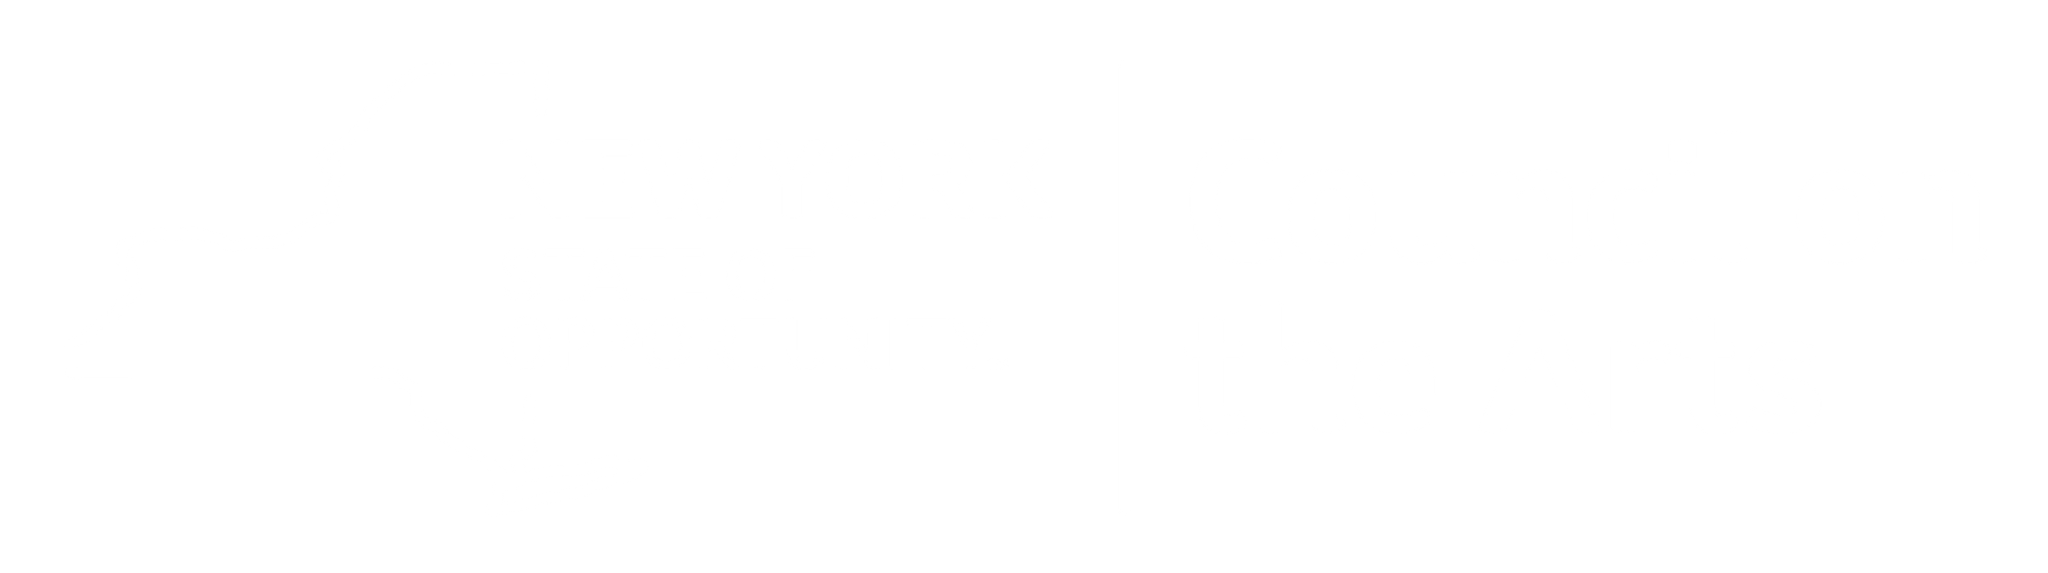 The New York State Council on the Arts logo including the outline of the state and the name of the organization in white